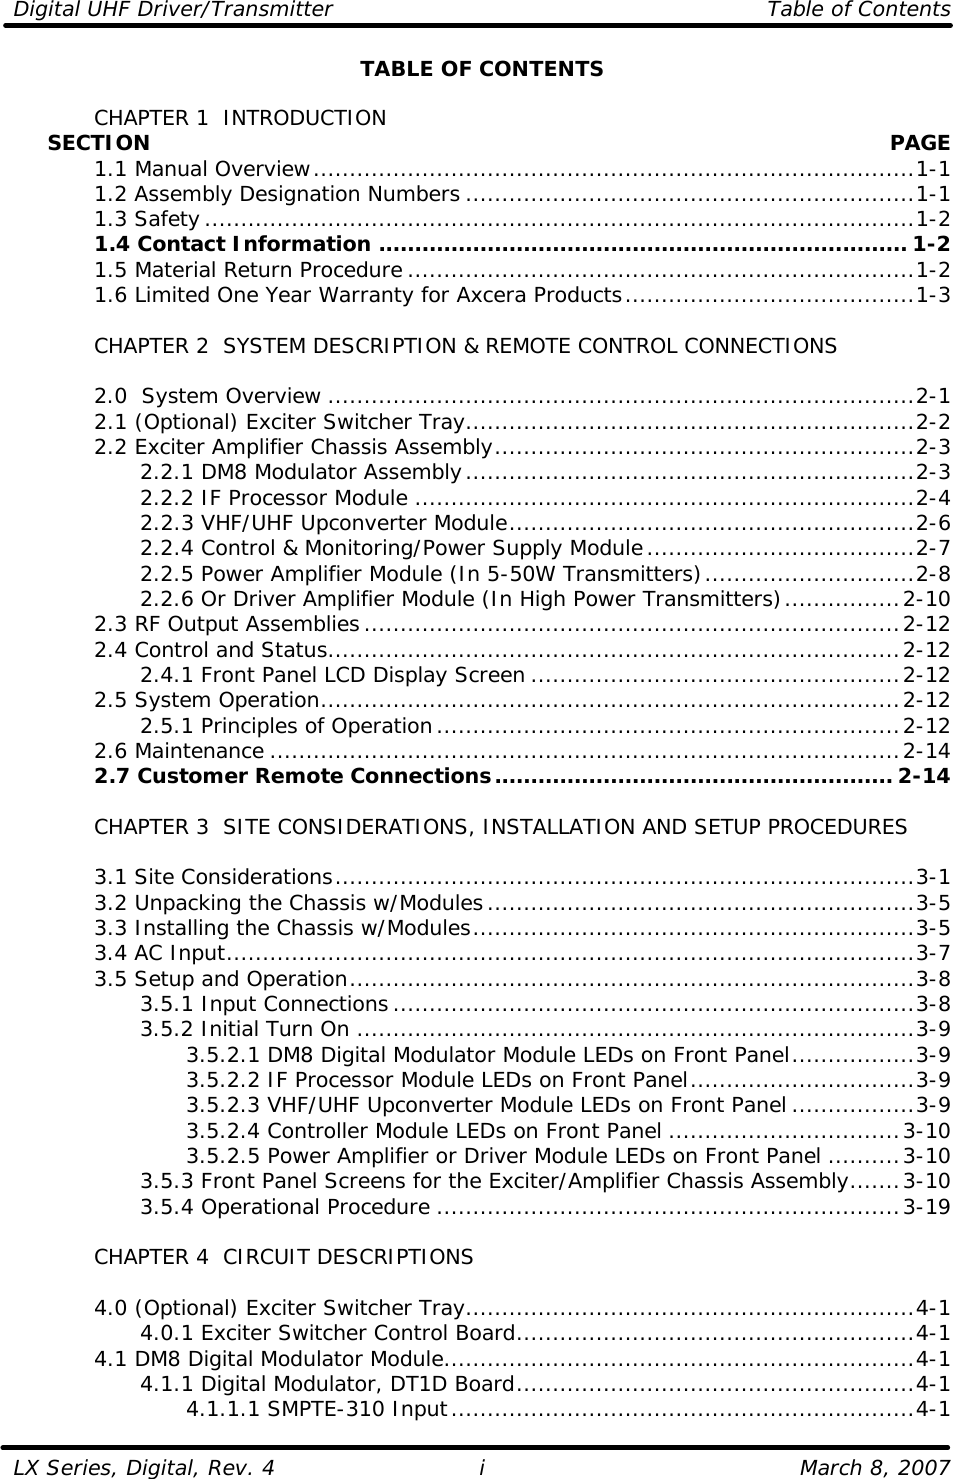 Digital UHF Driver/Transmitter    Table of Contents  LX Series, Digital, Rev. 4    March 8, 2007 i TABLE OF CONTENTS   CHAPTER 1  INTRODUCTION      SECTION    PAGE  1.1 Manual Overview...................................................................................1-1  1.2 Assembly Designation Numbers ..............................................................1-1  1.3 Safety..................................................................................................1-2  1.4 Contact Information ......................................................................... 1-2  1.5 Material Return Procedure ......................................................................1-2  1.6 Limited One Year Warranty for Axcera Products........................................1-3   CHAPTER 2  SYSTEM DESCRIPTION &amp; REMOTE CONTROL CONNECTIONS   2.0  System Overview .................................................................................2-1  2.1 (Optional) Exciter Switcher Tray..............................................................2-2  2.2 Exciter Amplifier Chassis Assembly..........................................................2-3     2.2.1 DM8 Modulator Assembly..............................................................2-3     2.2.2 IF Processor Module .....................................................................2-4     2.2.3 VHF/UHF Upconverter Module........................................................2-6     2.2.4 Control &amp; Monitoring/Power Supply Module.....................................2-7     2.2.5 Power Amplifier Module (In 5-50W Transmitters).............................2-8     2.2.6 Or Driver Amplifier Module (In High Power Transmitters)................2-10  2.3 RF Output Assemblies..........................................................................2-12  2.4 Control and Status...............................................................................2-12     2.4.1 Front Panel LCD Display Screen ...................................................2-12  2.5 System Operation................................................................................2-12     2.5.1 Principles of Operation................................................................2-12  2.6 Maintenance .......................................................................................2-14  2.7 Customer Remote Connections....................................................... 2-14       CHAPTER 3  SITE CONSIDERATIONS, INSTALLATION AND SETUP PROCEDURES     3.1 Site Considerations................................................................................3-1  3.2 Unpacking the Chassis w/Modules...........................................................3-5  3.3 Installing the Chassis w/Modules.............................................................3-5  3.4 AC Input...............................................................................................3-7  3.5 Setup and Operation..............................................................................3-8     3.5.1 Input Connections........................................................................3-8     3.5.2 Initial Turn On .............................................................................3-9     3.5.2.1 DM8 Digital Modulator Module LEDs on Front Panel.................3-9     3.5.2.2 IF Processor Module LEDs on Front Panel...............................3-9     3.5.2.3 VHF/UHF Upconverter Module LEDs on Front Panel .................3-9     3.5.2.4 Controller Module LEDs on Front Panel ................................3-10     3.5.2.5 Power Amplifier or Driver Module LEDs on Front Panel..........3-10     3.5.3 Front Panel Screens for the Exciter/Amplifier Chassis Assembly.......3-10     3.5.4 Operational Procedure ................................................................3-19   CHAPTER 4  CIRCUIT DESCRIPTIONS   4.0 (Optional) Exciter Switcher Tray..............................................................4-1     4.0.1 Exciter Switcher Control Board.......................................................4-1  4.1 DM8 Digital Modulator Module.................................................................4-1     4.1.1 Digital Modulator, DT1D Board.......................................................4-1     4.1.1.1 SMPTE-310 Input................................................................4-1 